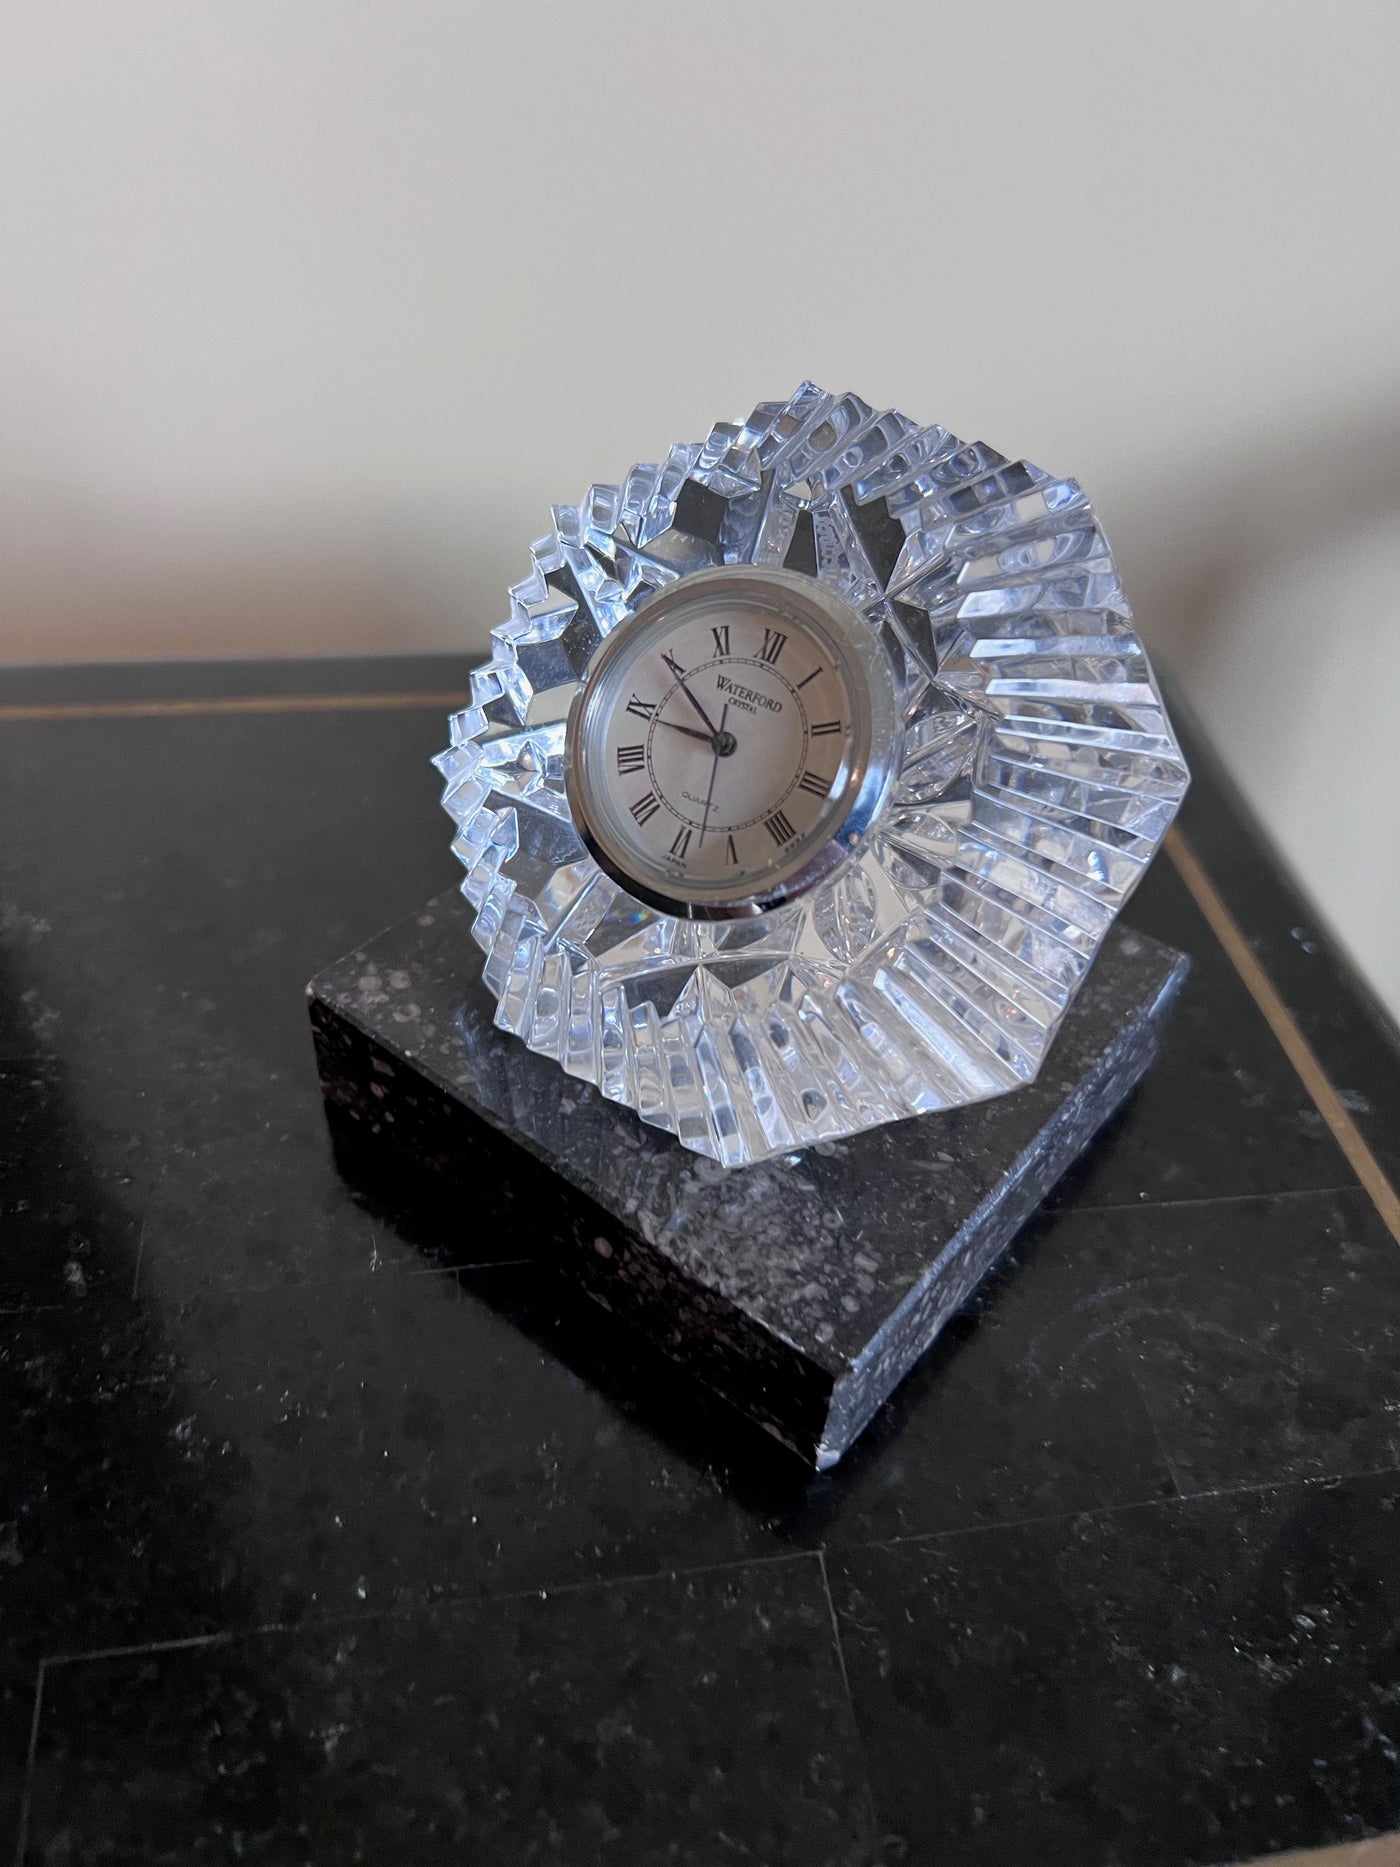 Waterford Crystal Clock - YouTube